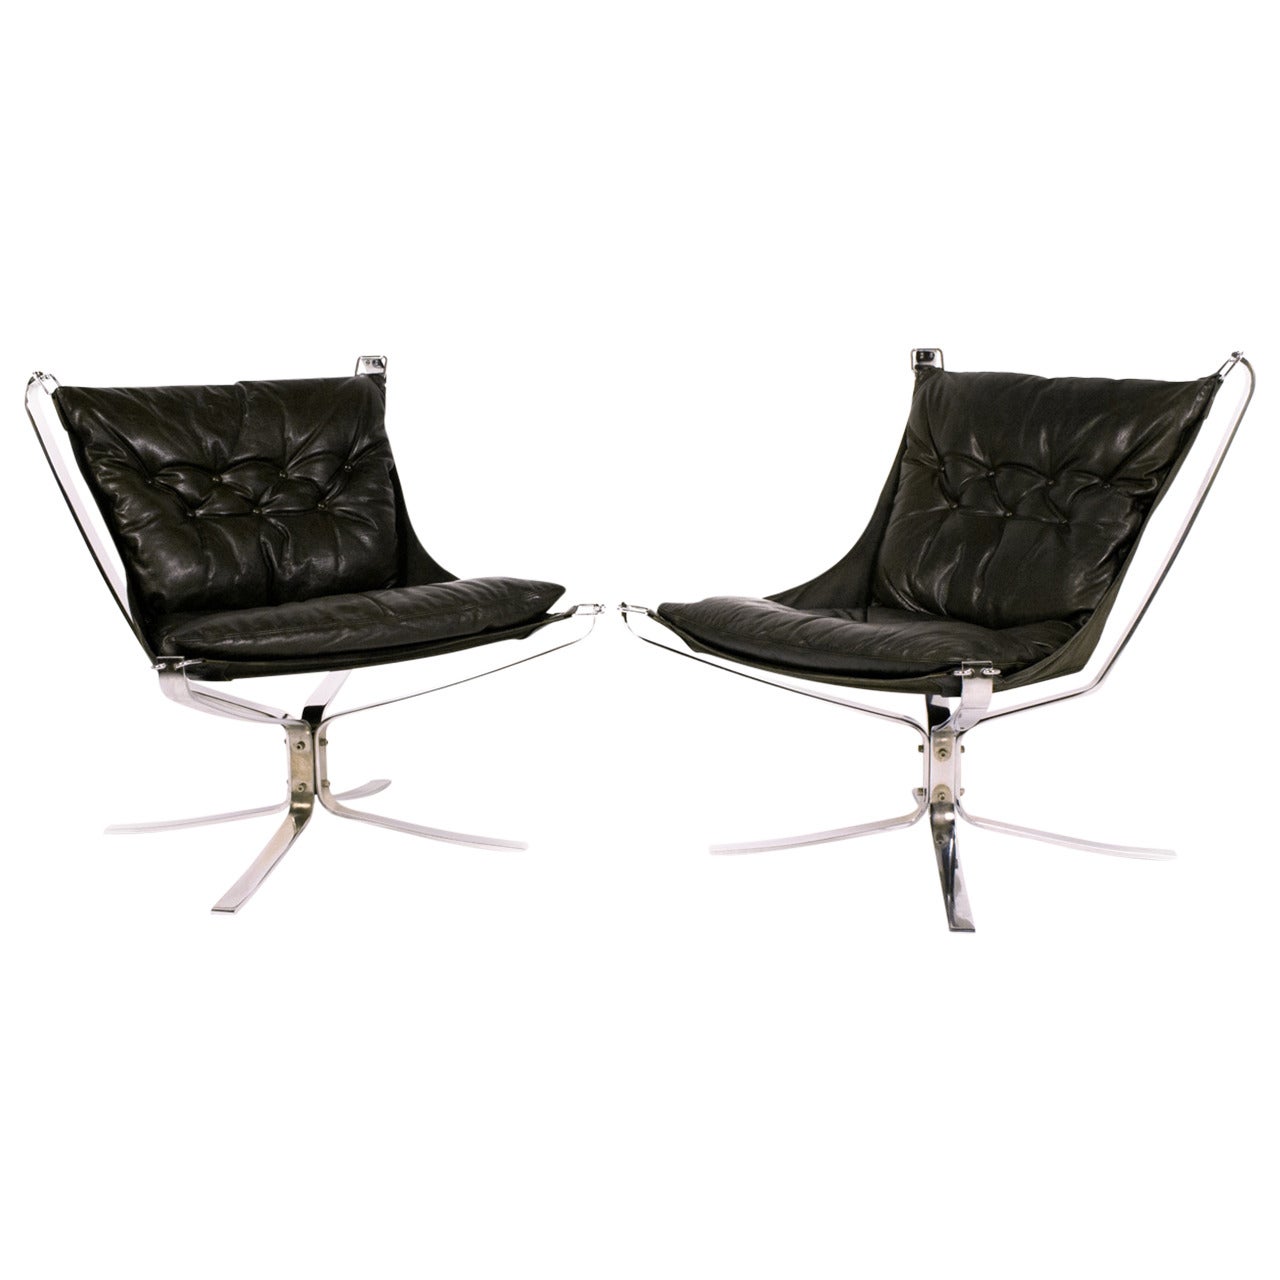 Sigurd Resell Pair of Easy "Falcon" Chairs